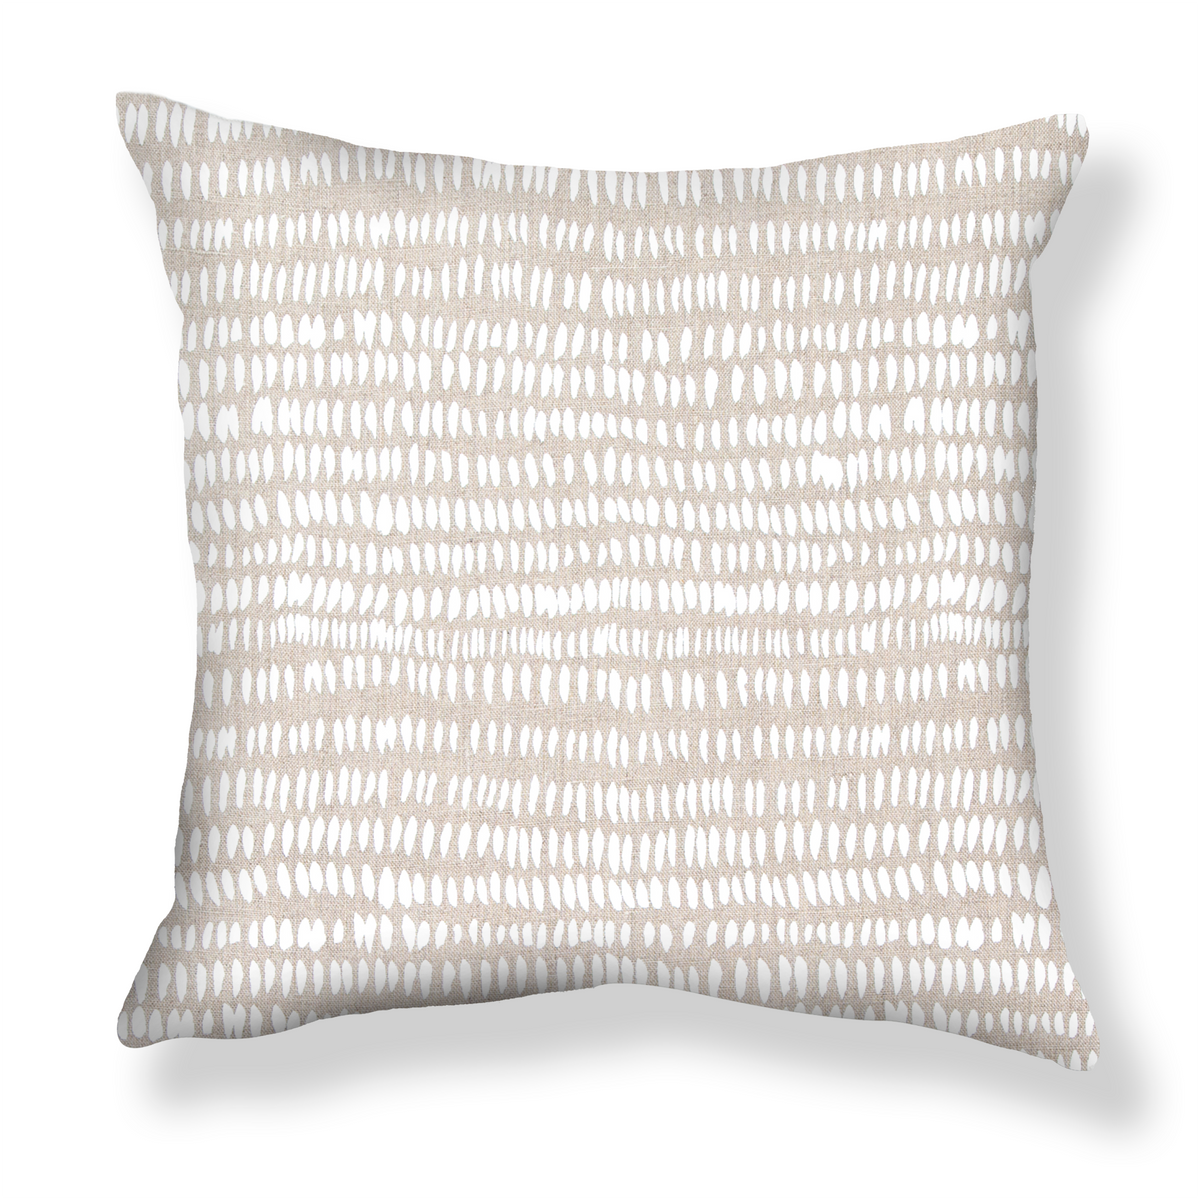 Dashes Pillow in White/Natural